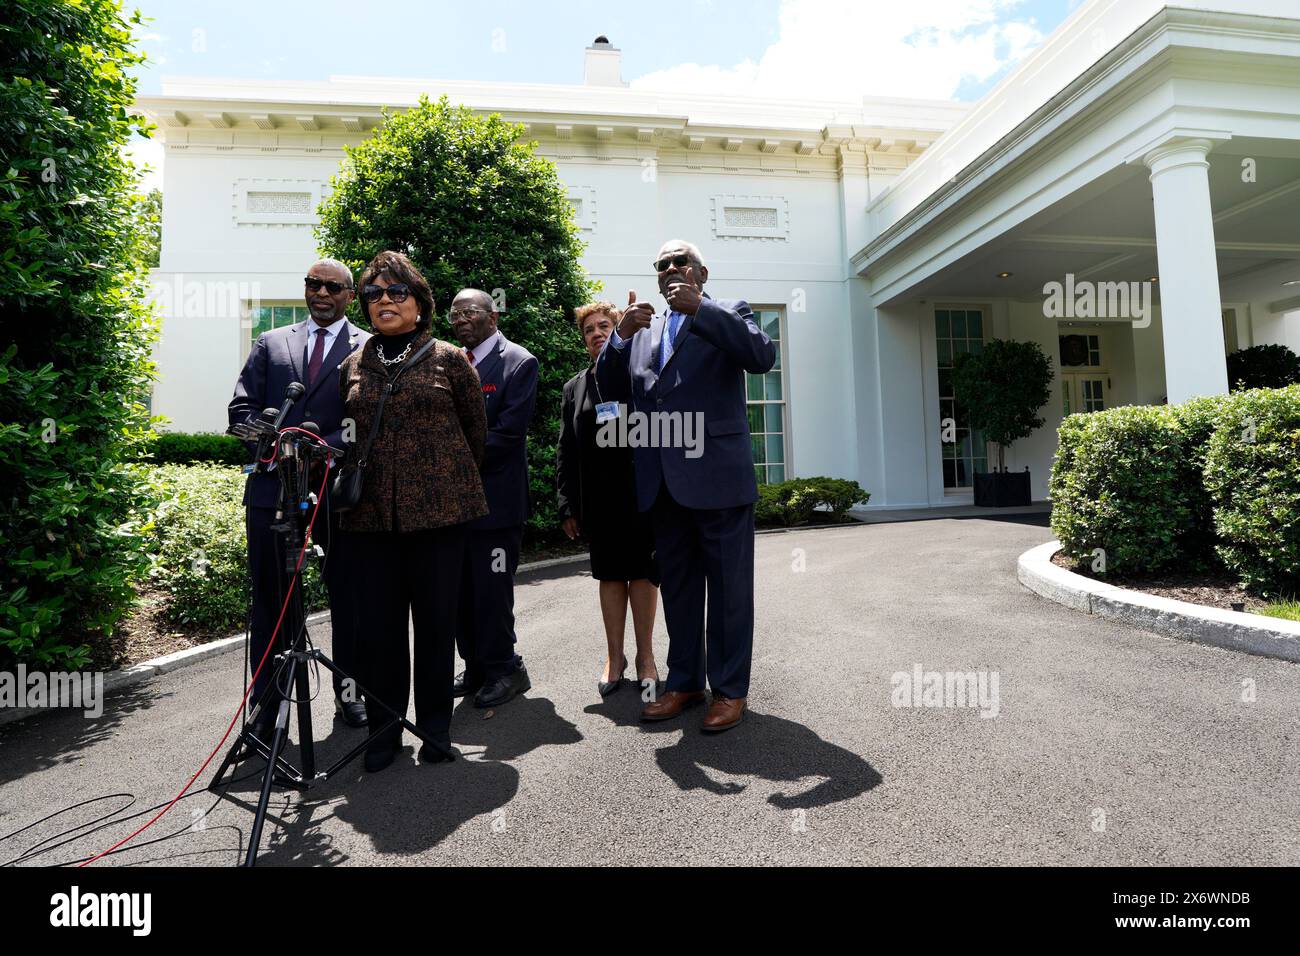 Cheryl Brown Henderson, Daughter of Brown v. Board of Education named plaintiff, Oliver Brown, with other plaintiffs speaks to the media after their meeting with US President Joe Biden at the White House in Washington on May 16, 2024. Credit: Yuri Gripas/Pool via CNP/MediaPunch Stock Photo